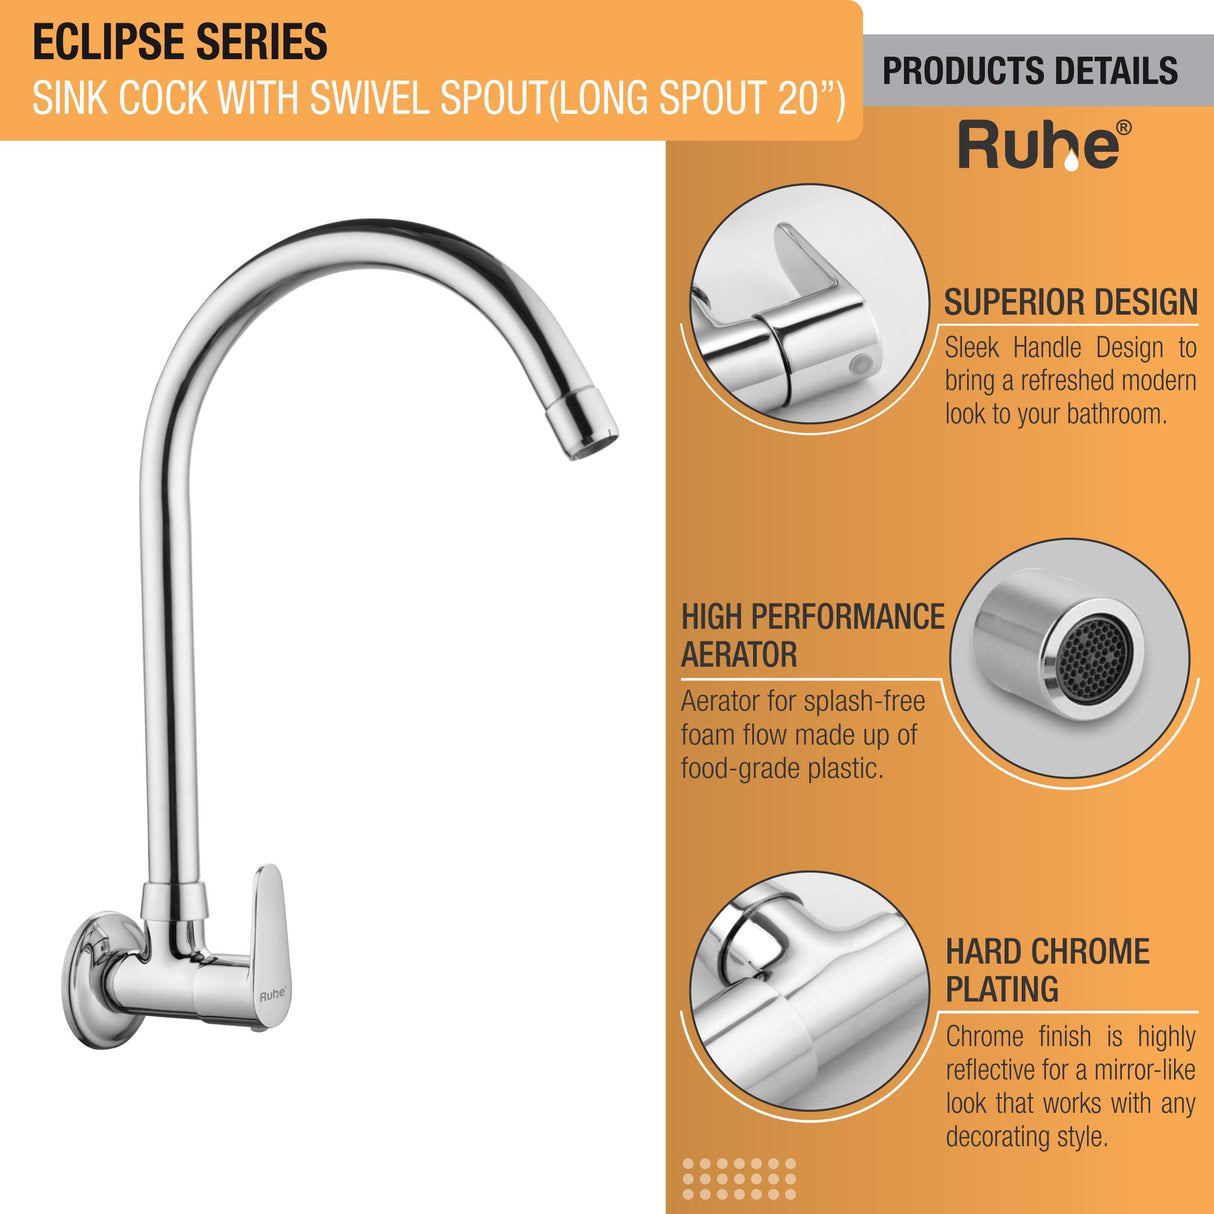 Eclipse Sink Tap with Large (20 inches) Round Swivel Spout Faucet product details